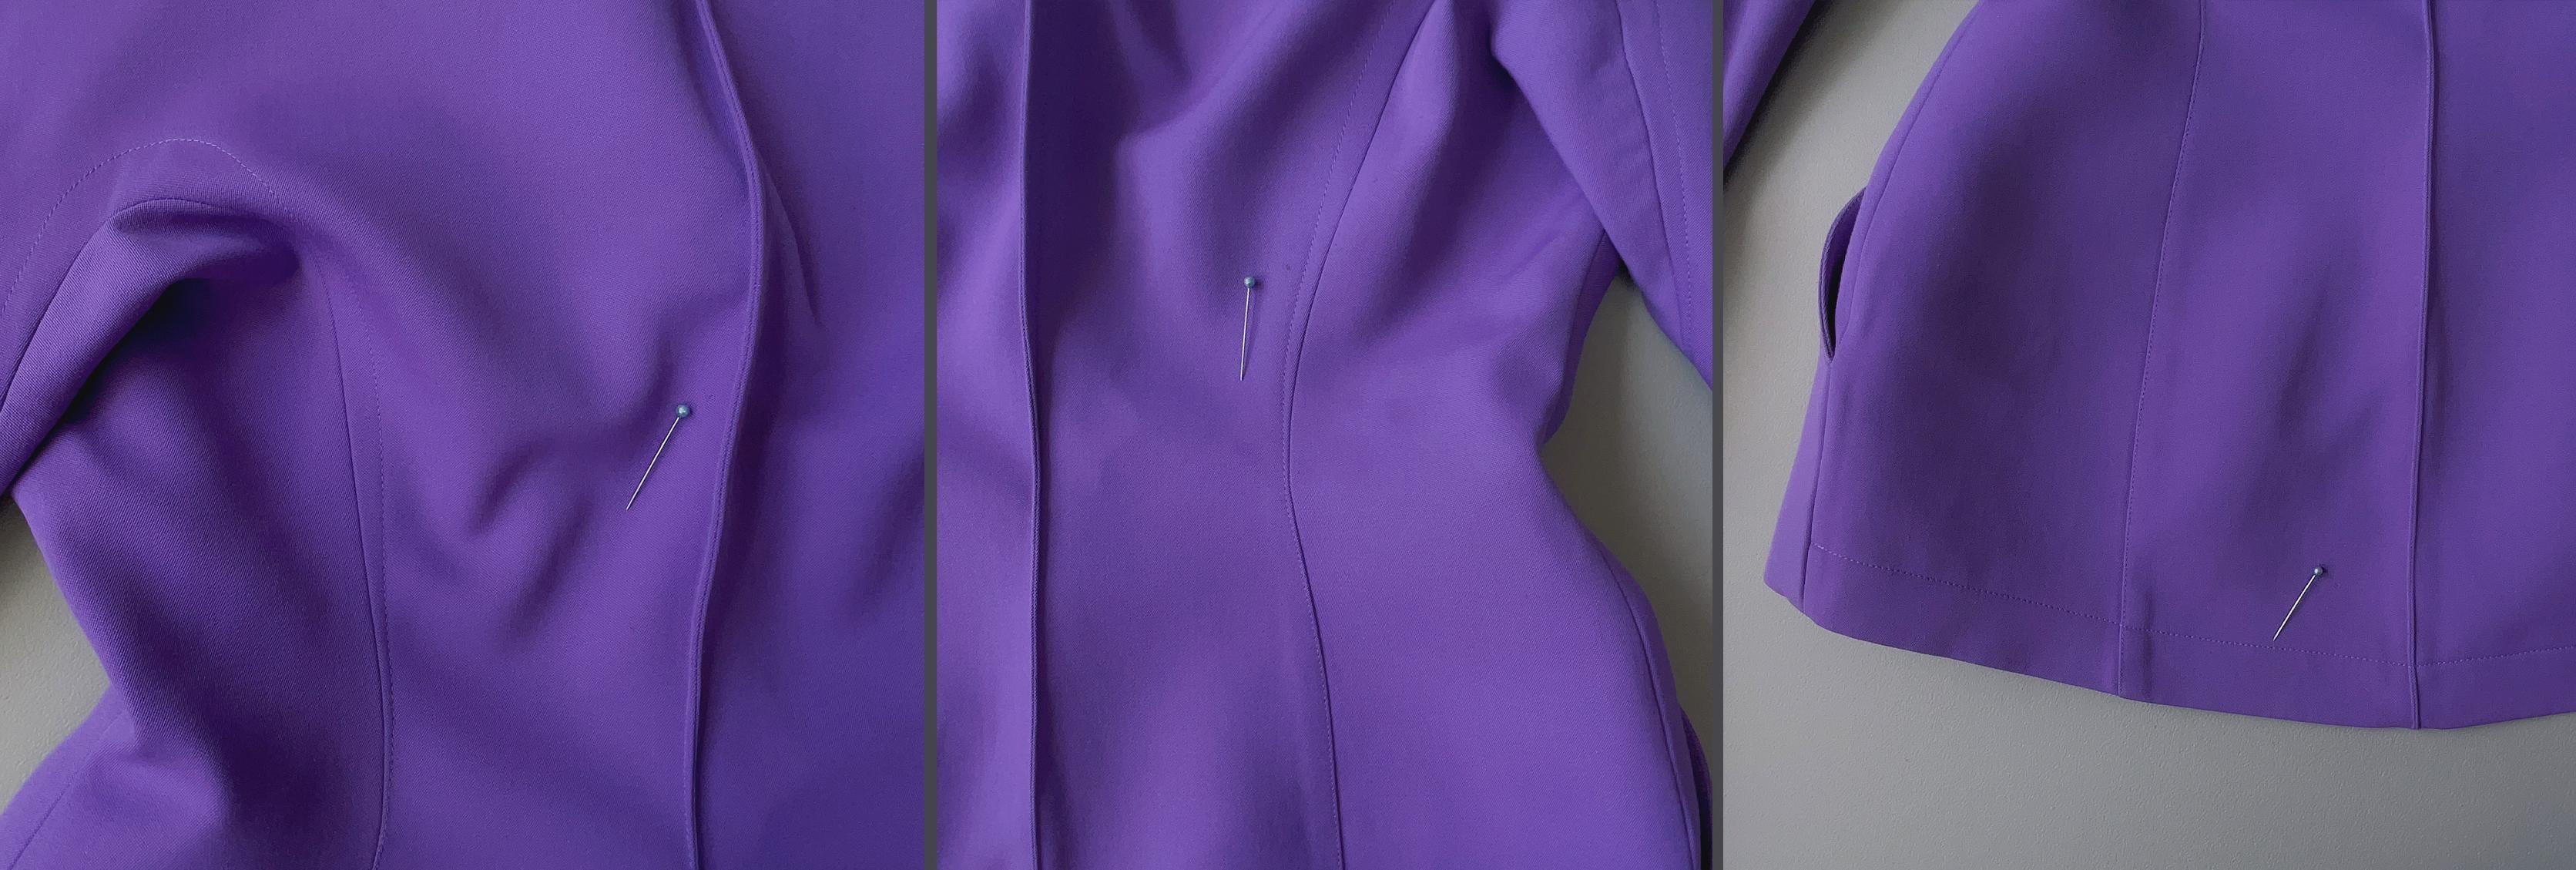 Thierry Mugler FW1989 Archival Sculptural Jacket  Dramatic Iman Purple / Violet  For Sale 5